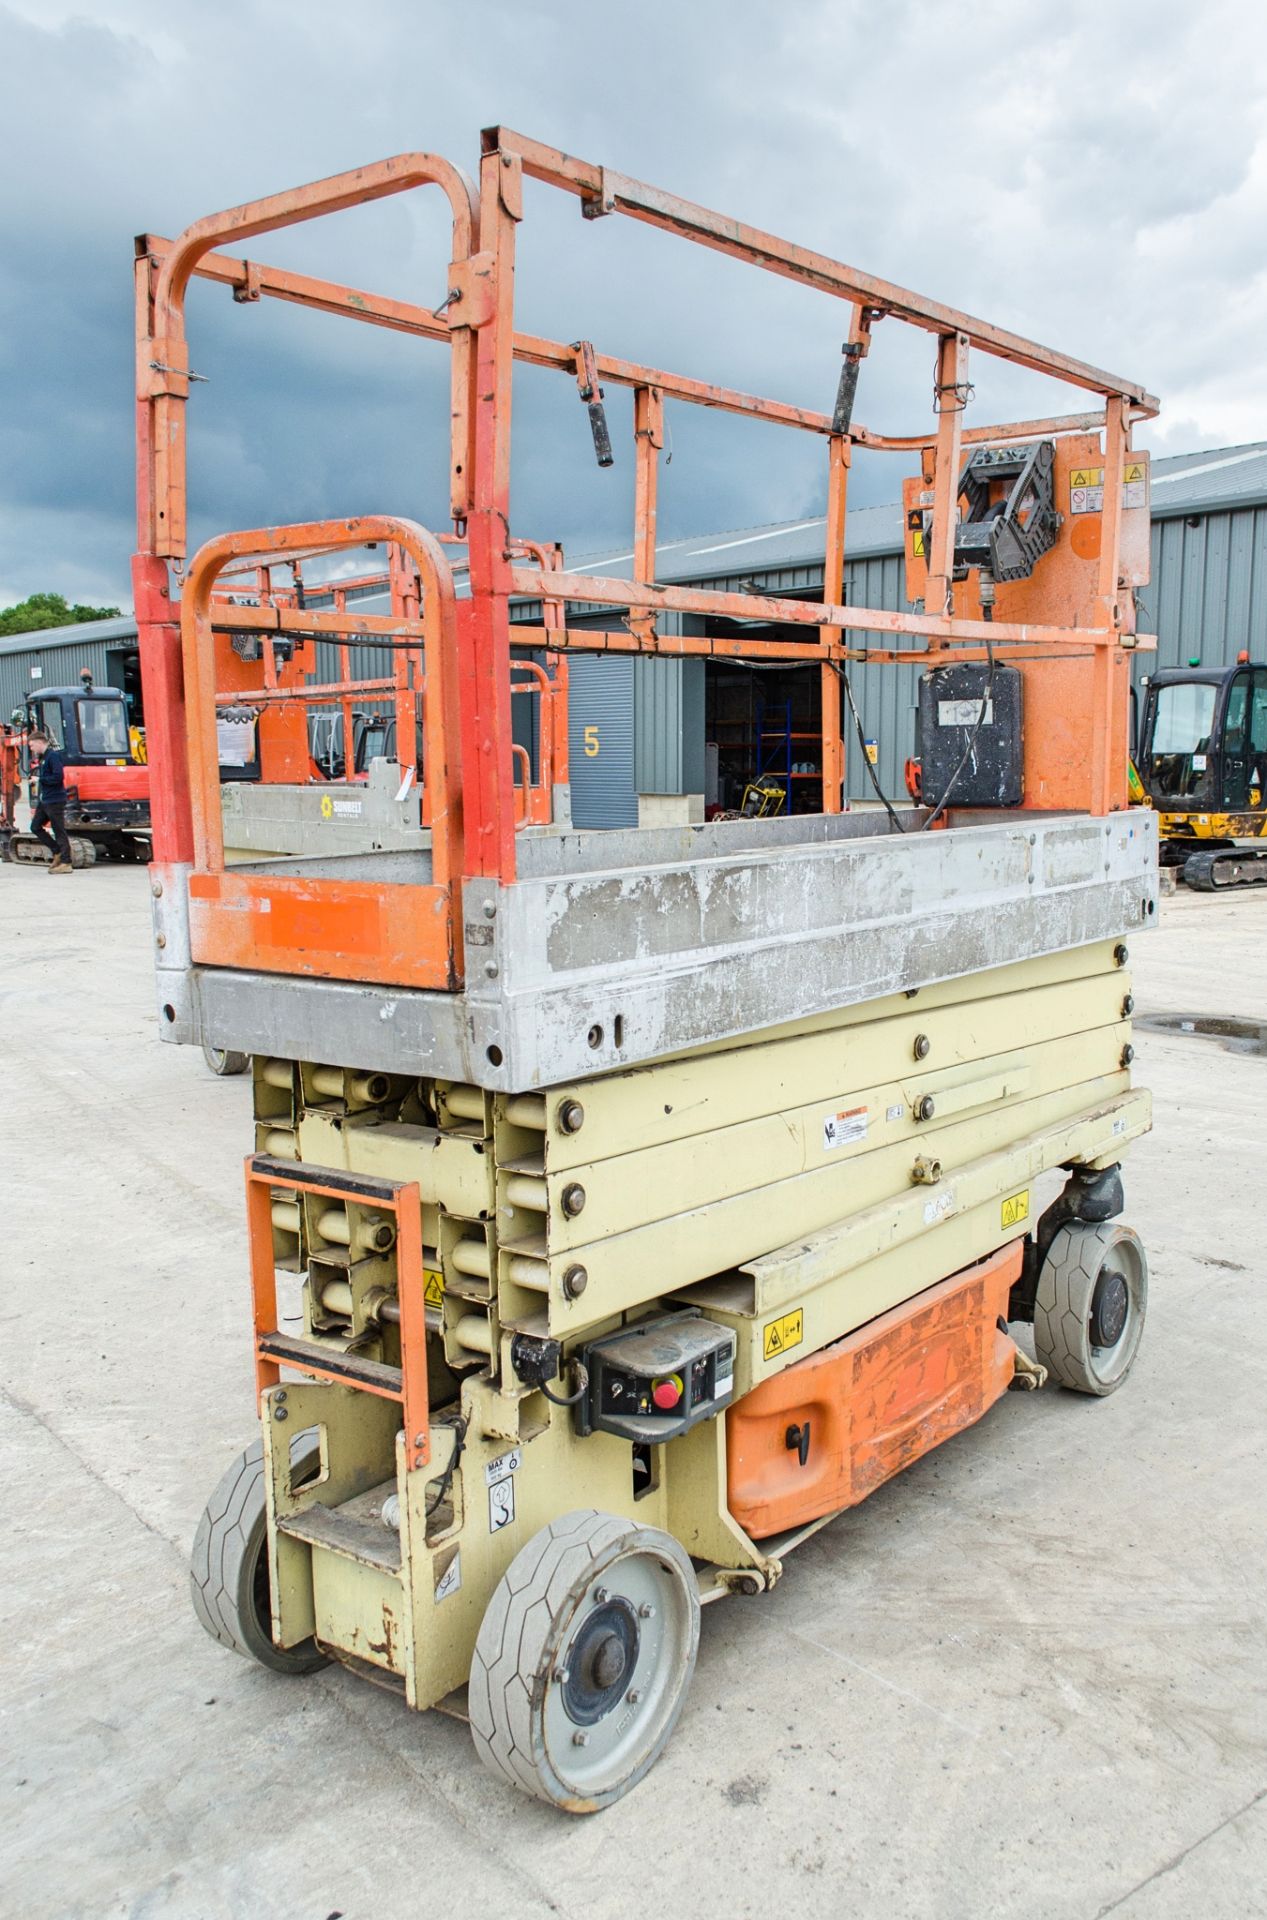 JLG 2630 ES battery electric scissor lift Year: 2006 S/N: 10681 Recorded Hours: 456 HYP066